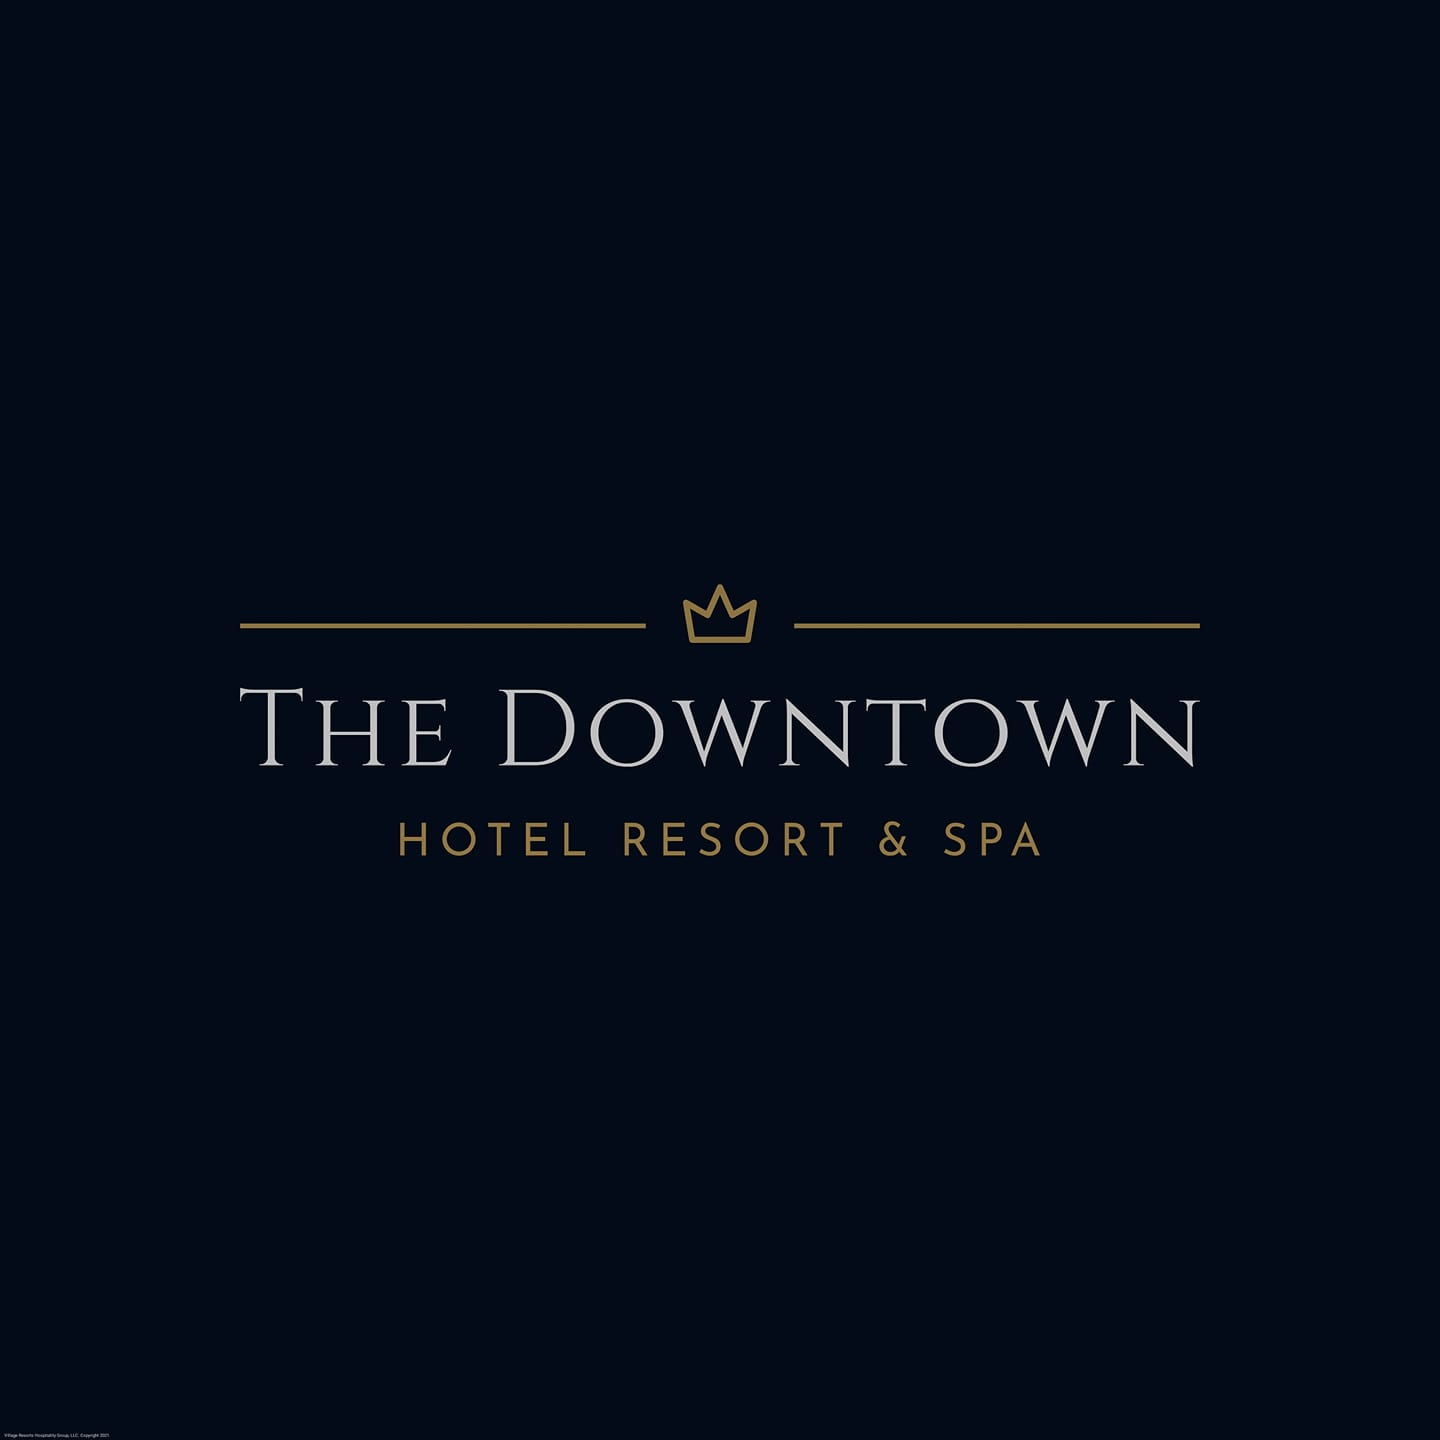 The Downtown Hotel Resort & Spa